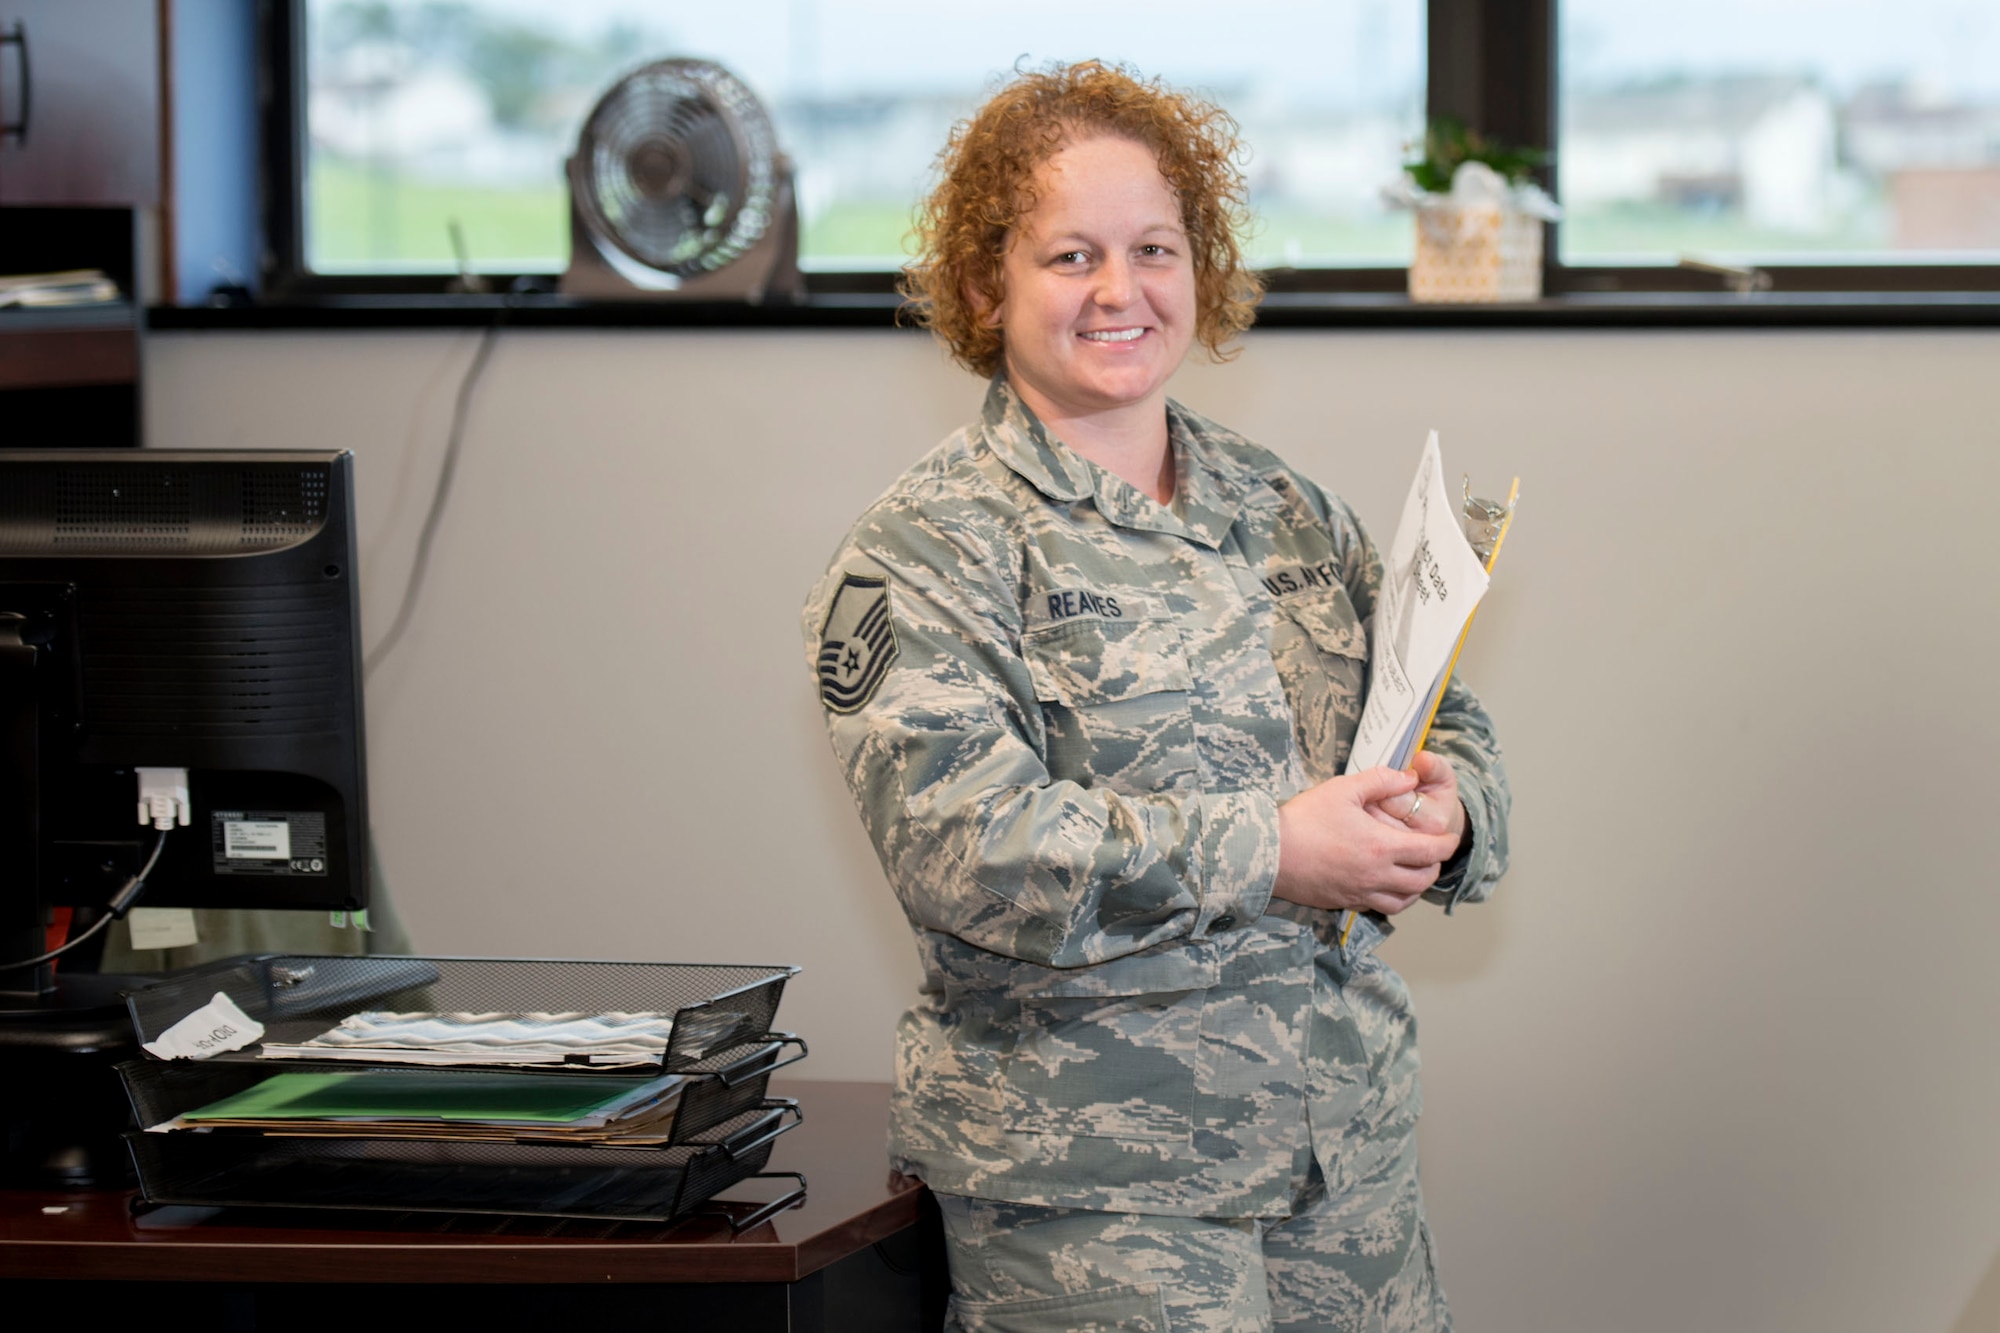 Master Sgt. Becky Reaves is the 167th Airlift Wing's administrative superintendent and the wing's Airman Spotlight for the month of November.